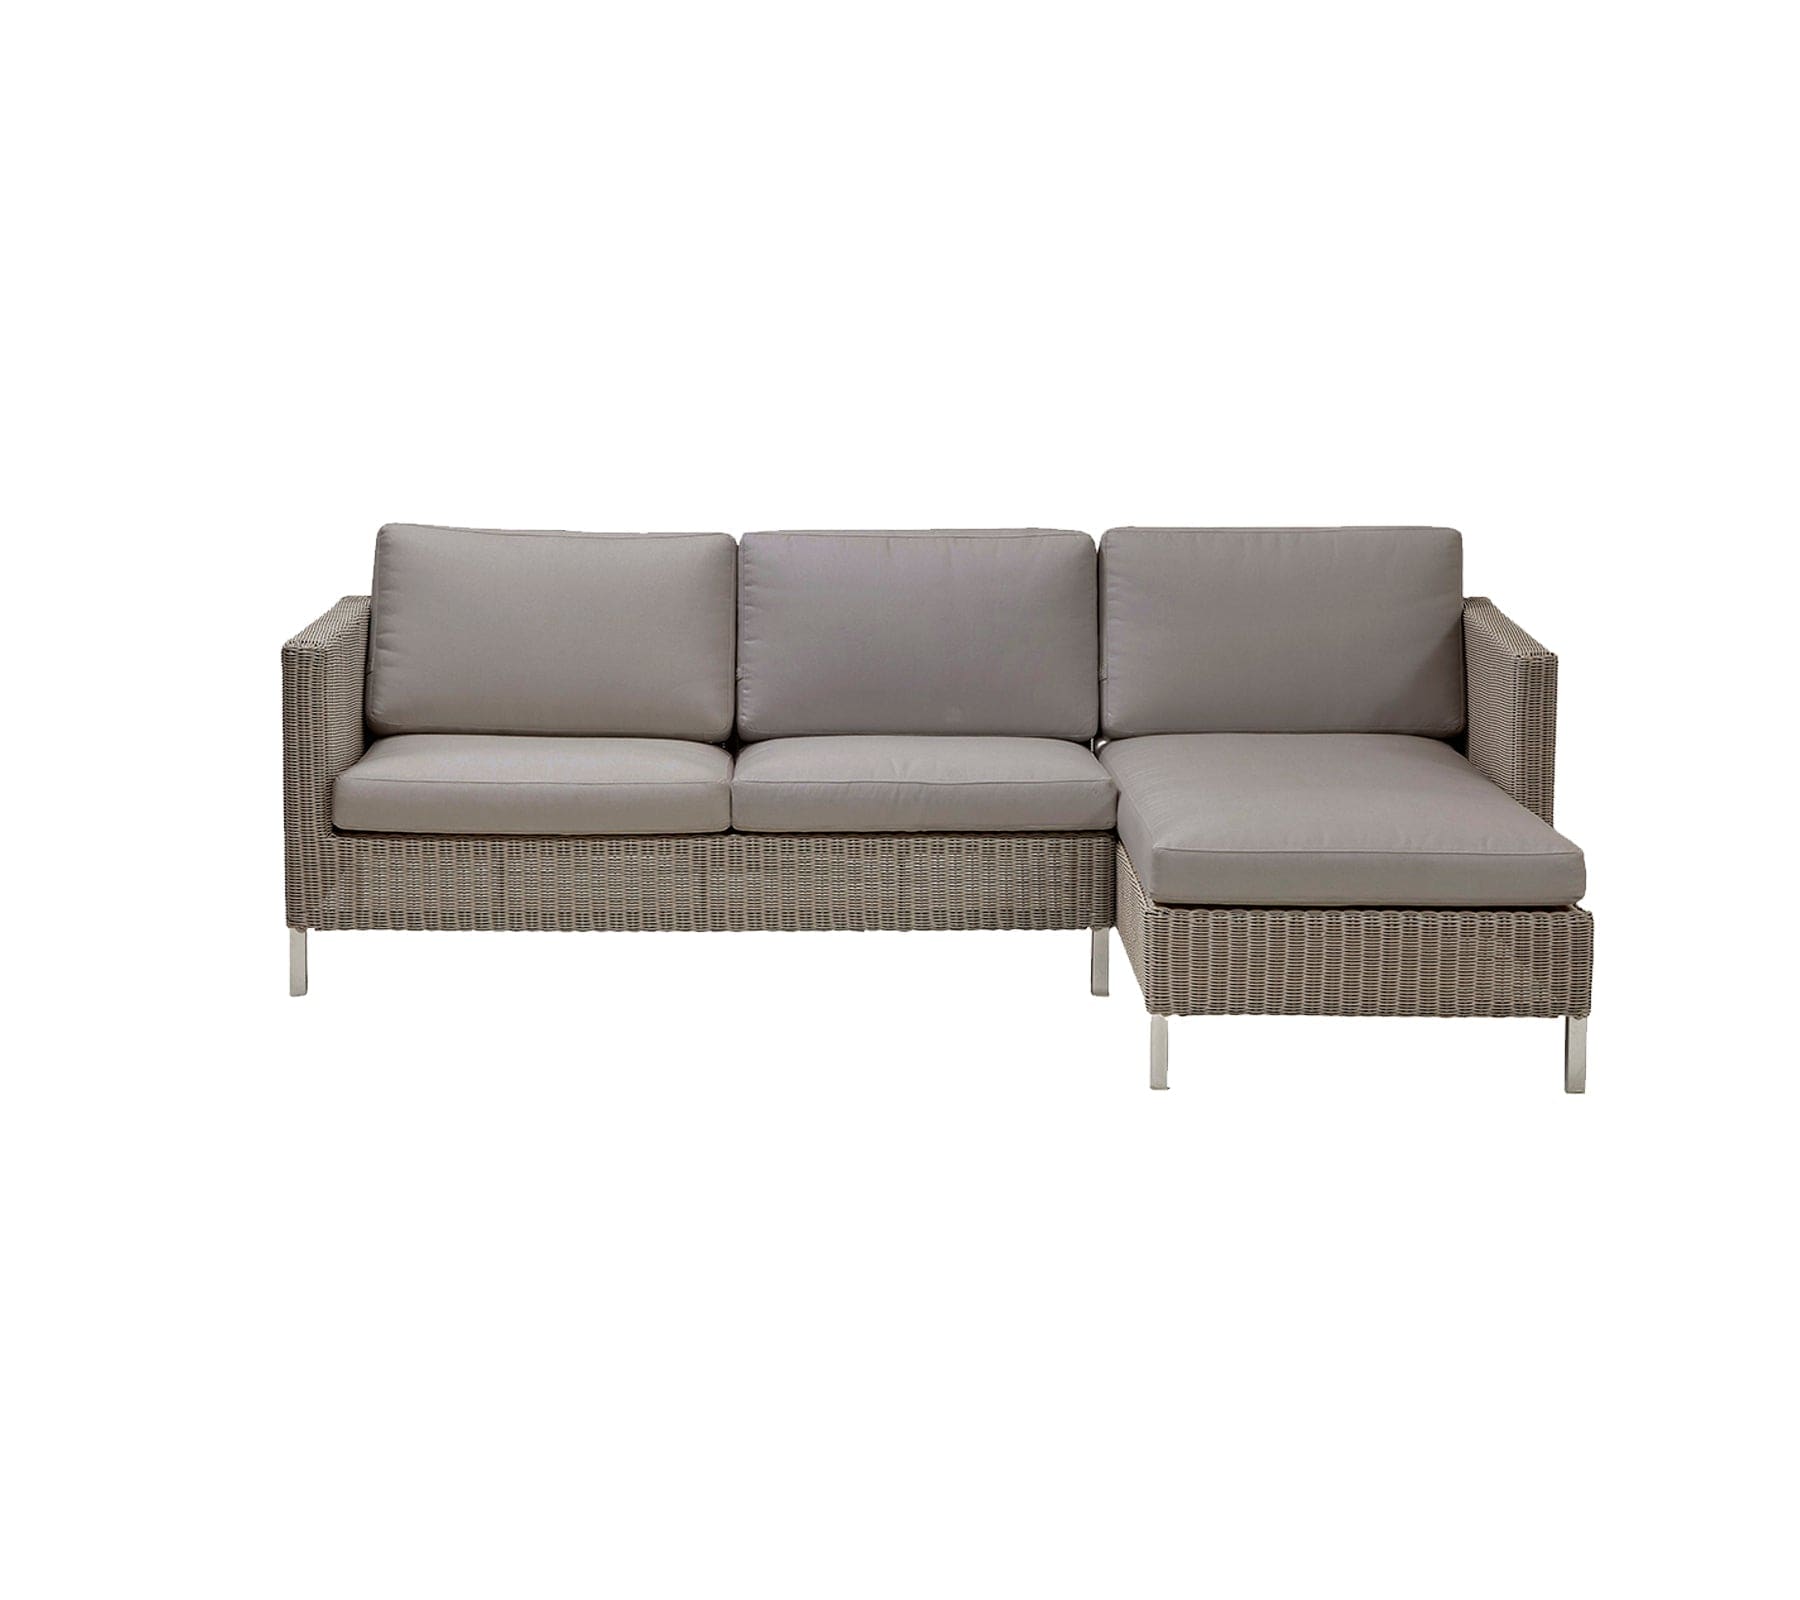 Cane-Line Denmark Taupe - Cane-line Weave - w/Taupe cushions Cane-Line -Connect lounge w/Cane-line Natté cushions (1)